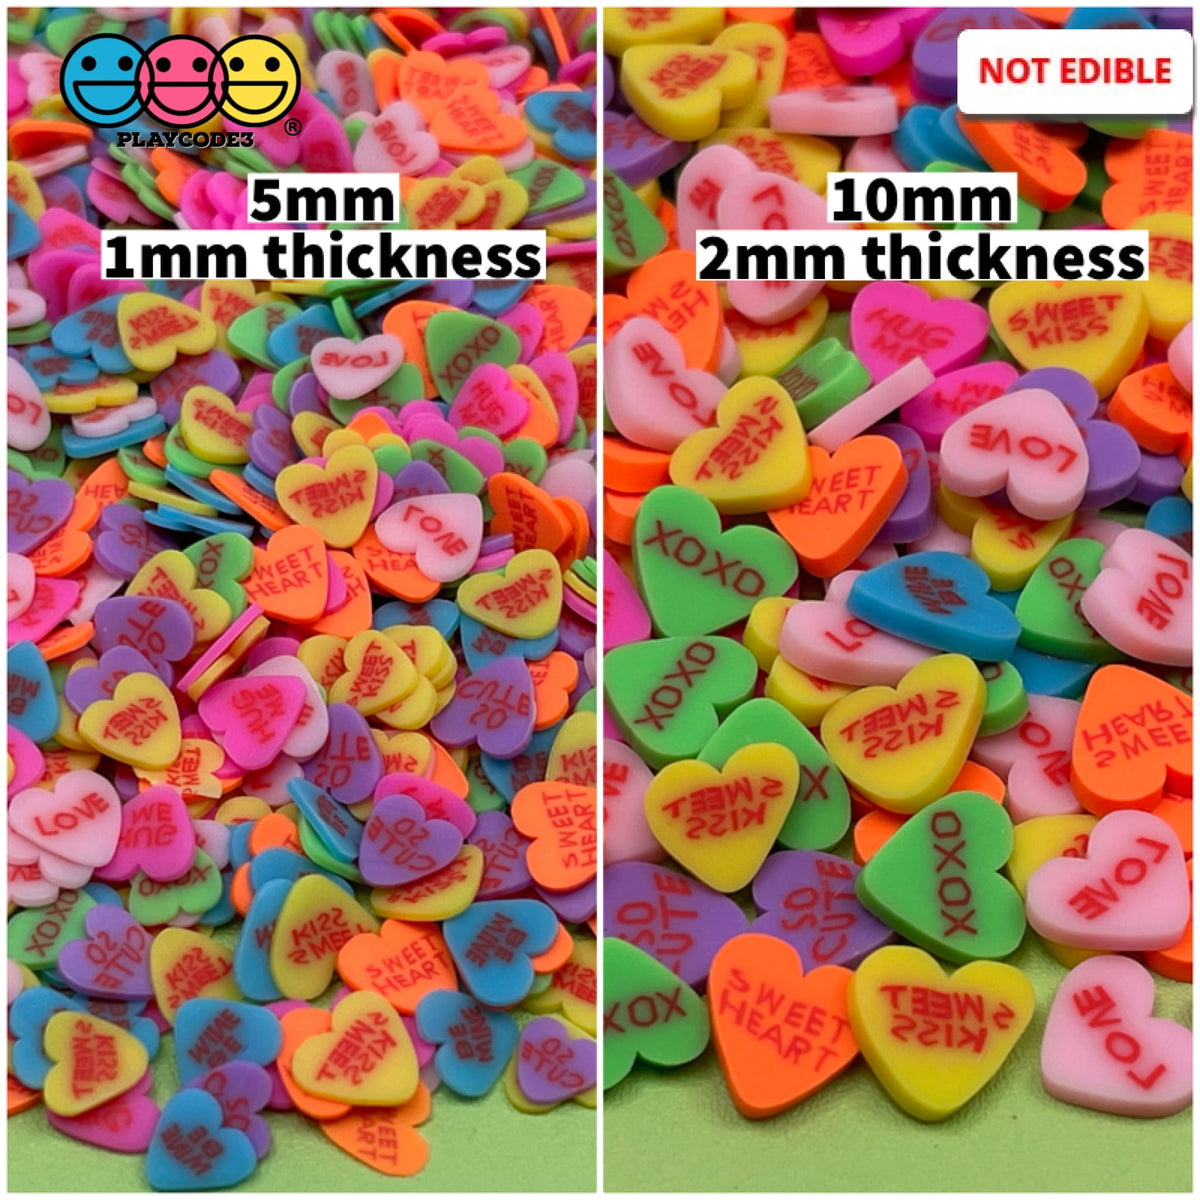 Sweethearts Valentine's Candy Conversation Hearts, Fruit Candy, 10.5 oz Bag  